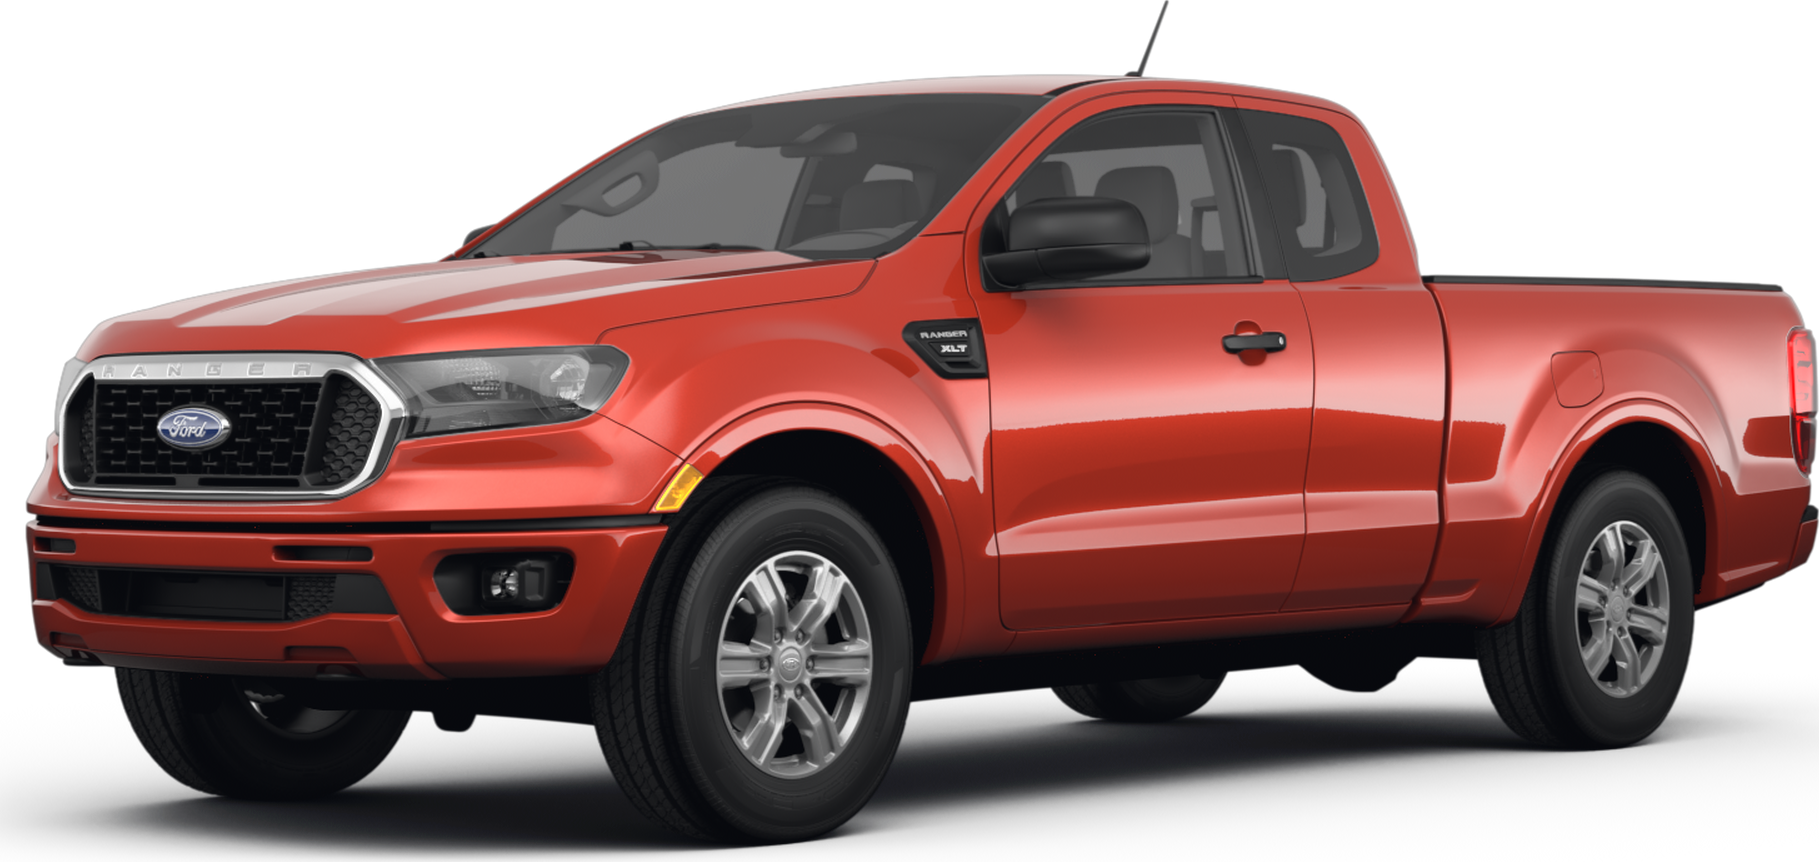 You can now have the Ford Ranger as a plug-in hybrid pickup